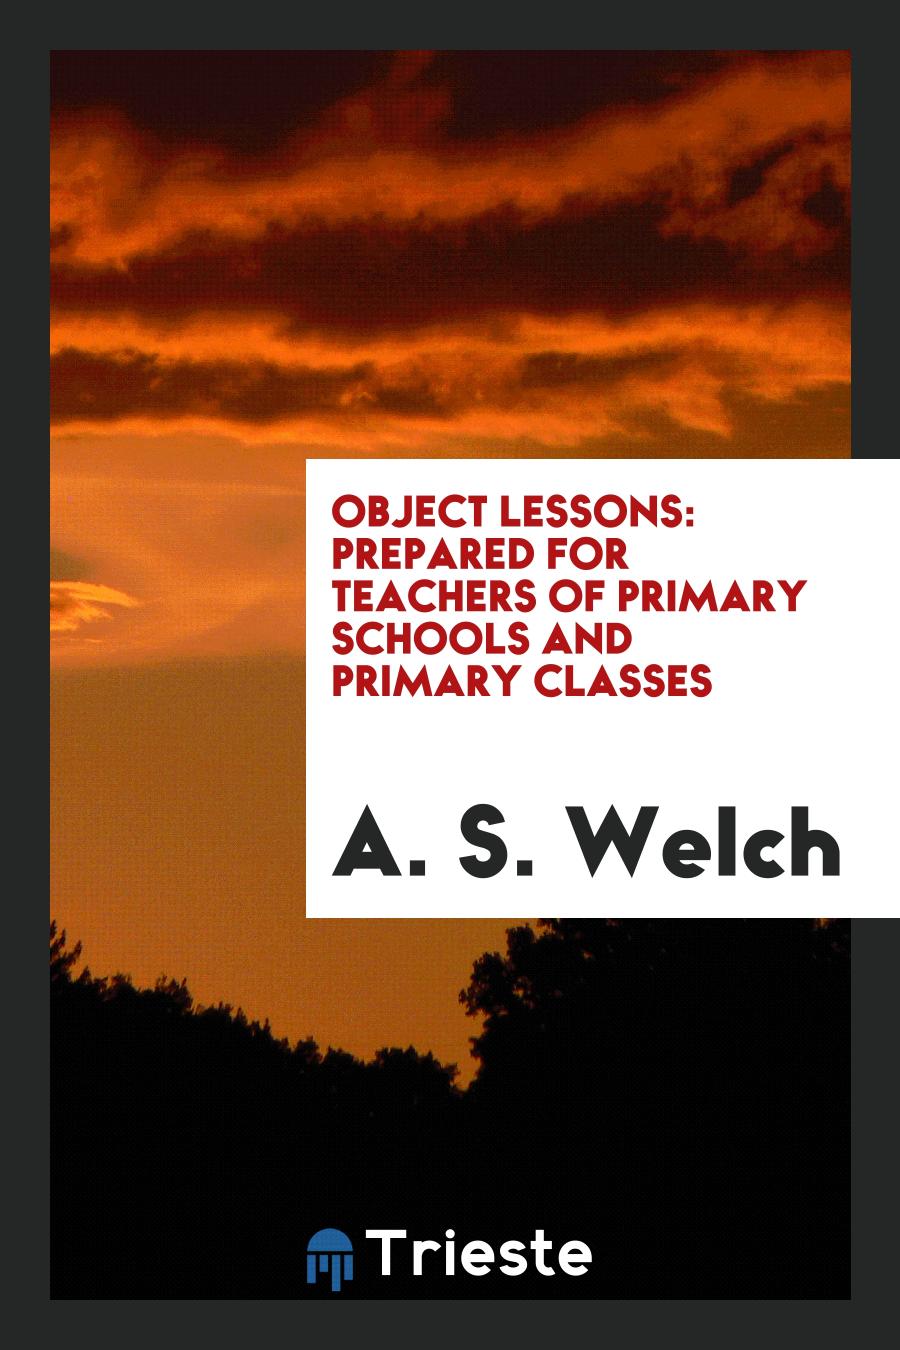 Object Lessons: Prepared for Teachers of Primary Schools and Primary Classes